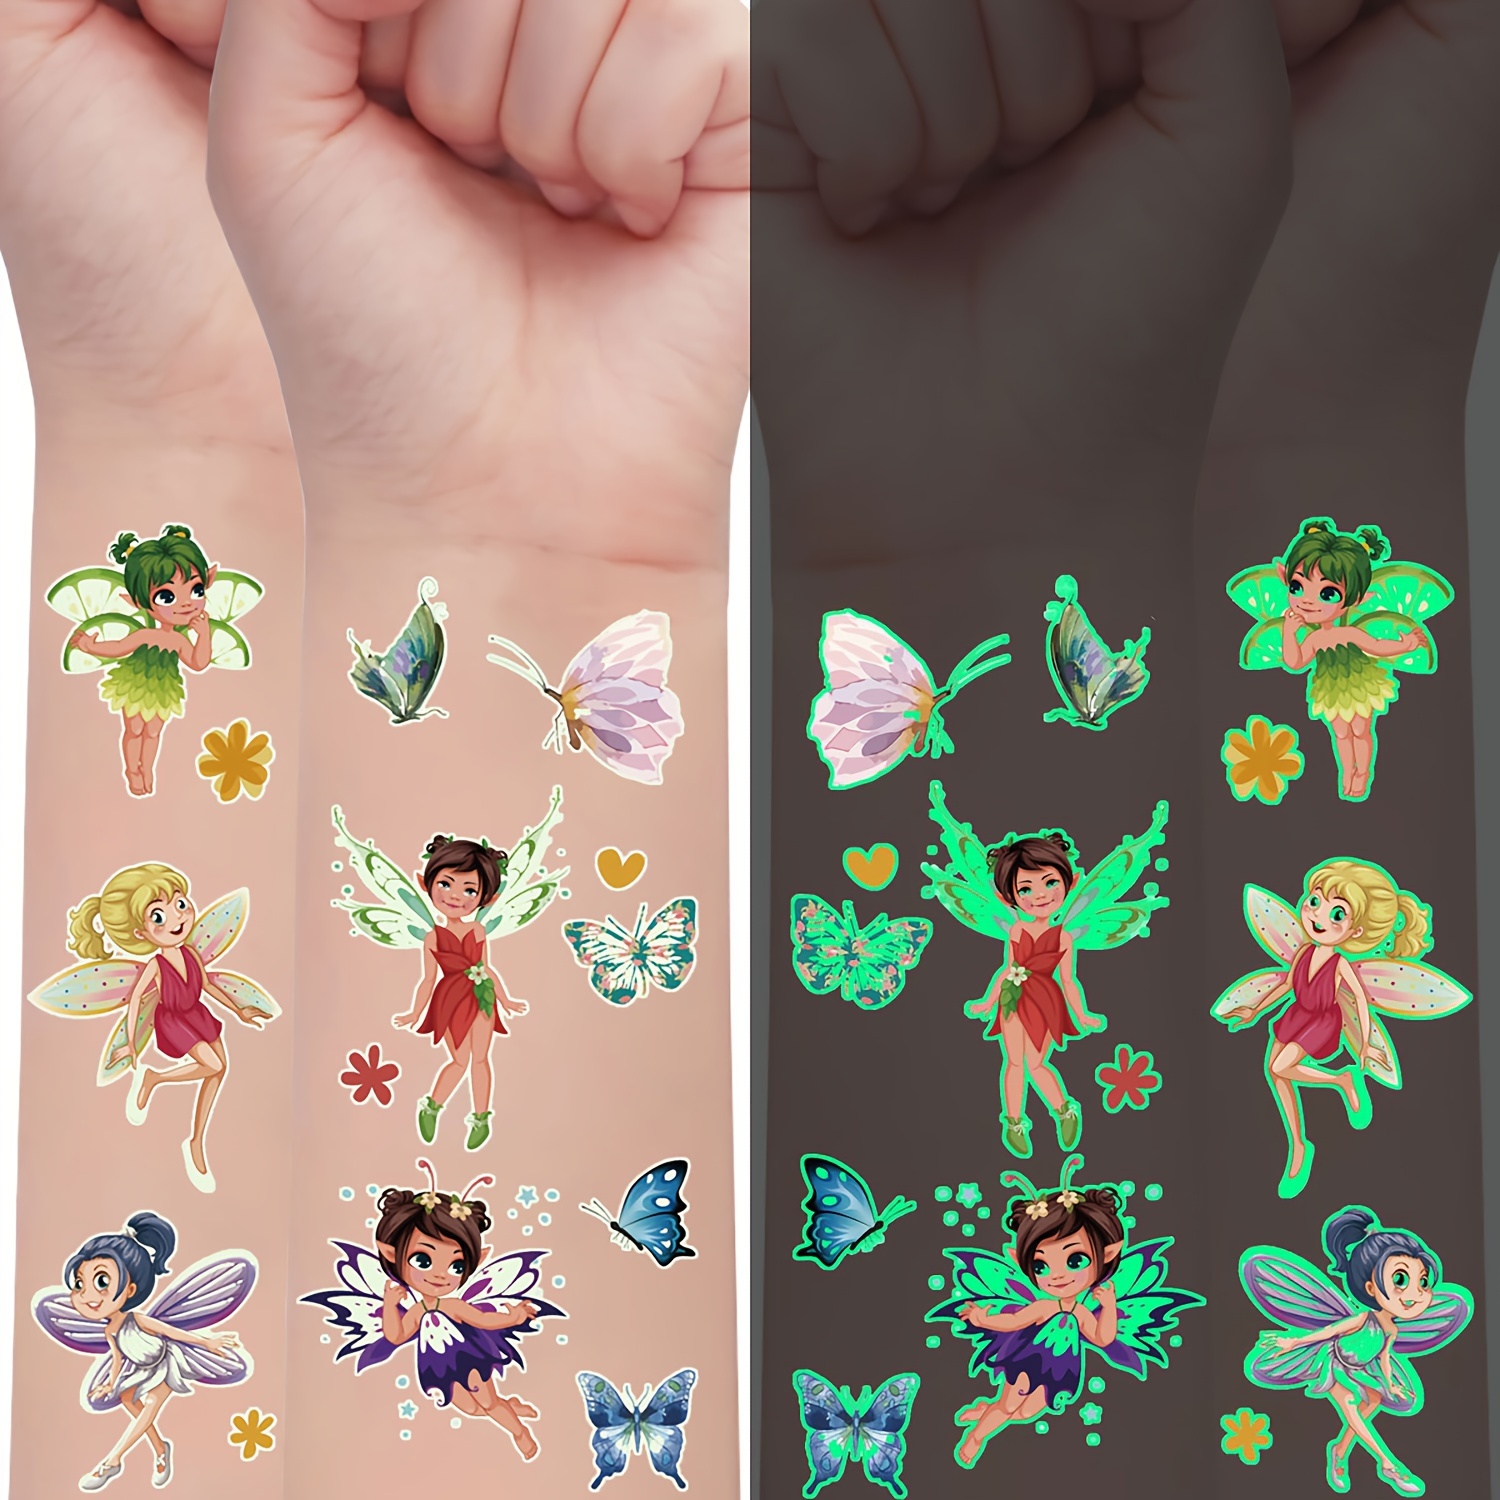 

110-piece Glow In The Dark Temporary Tattoos Set With Colorful Butterfly, Fairy, And Designs - Waterproof Fun Dress-up Stickers Perfect For Girls Birthday Party Gifts